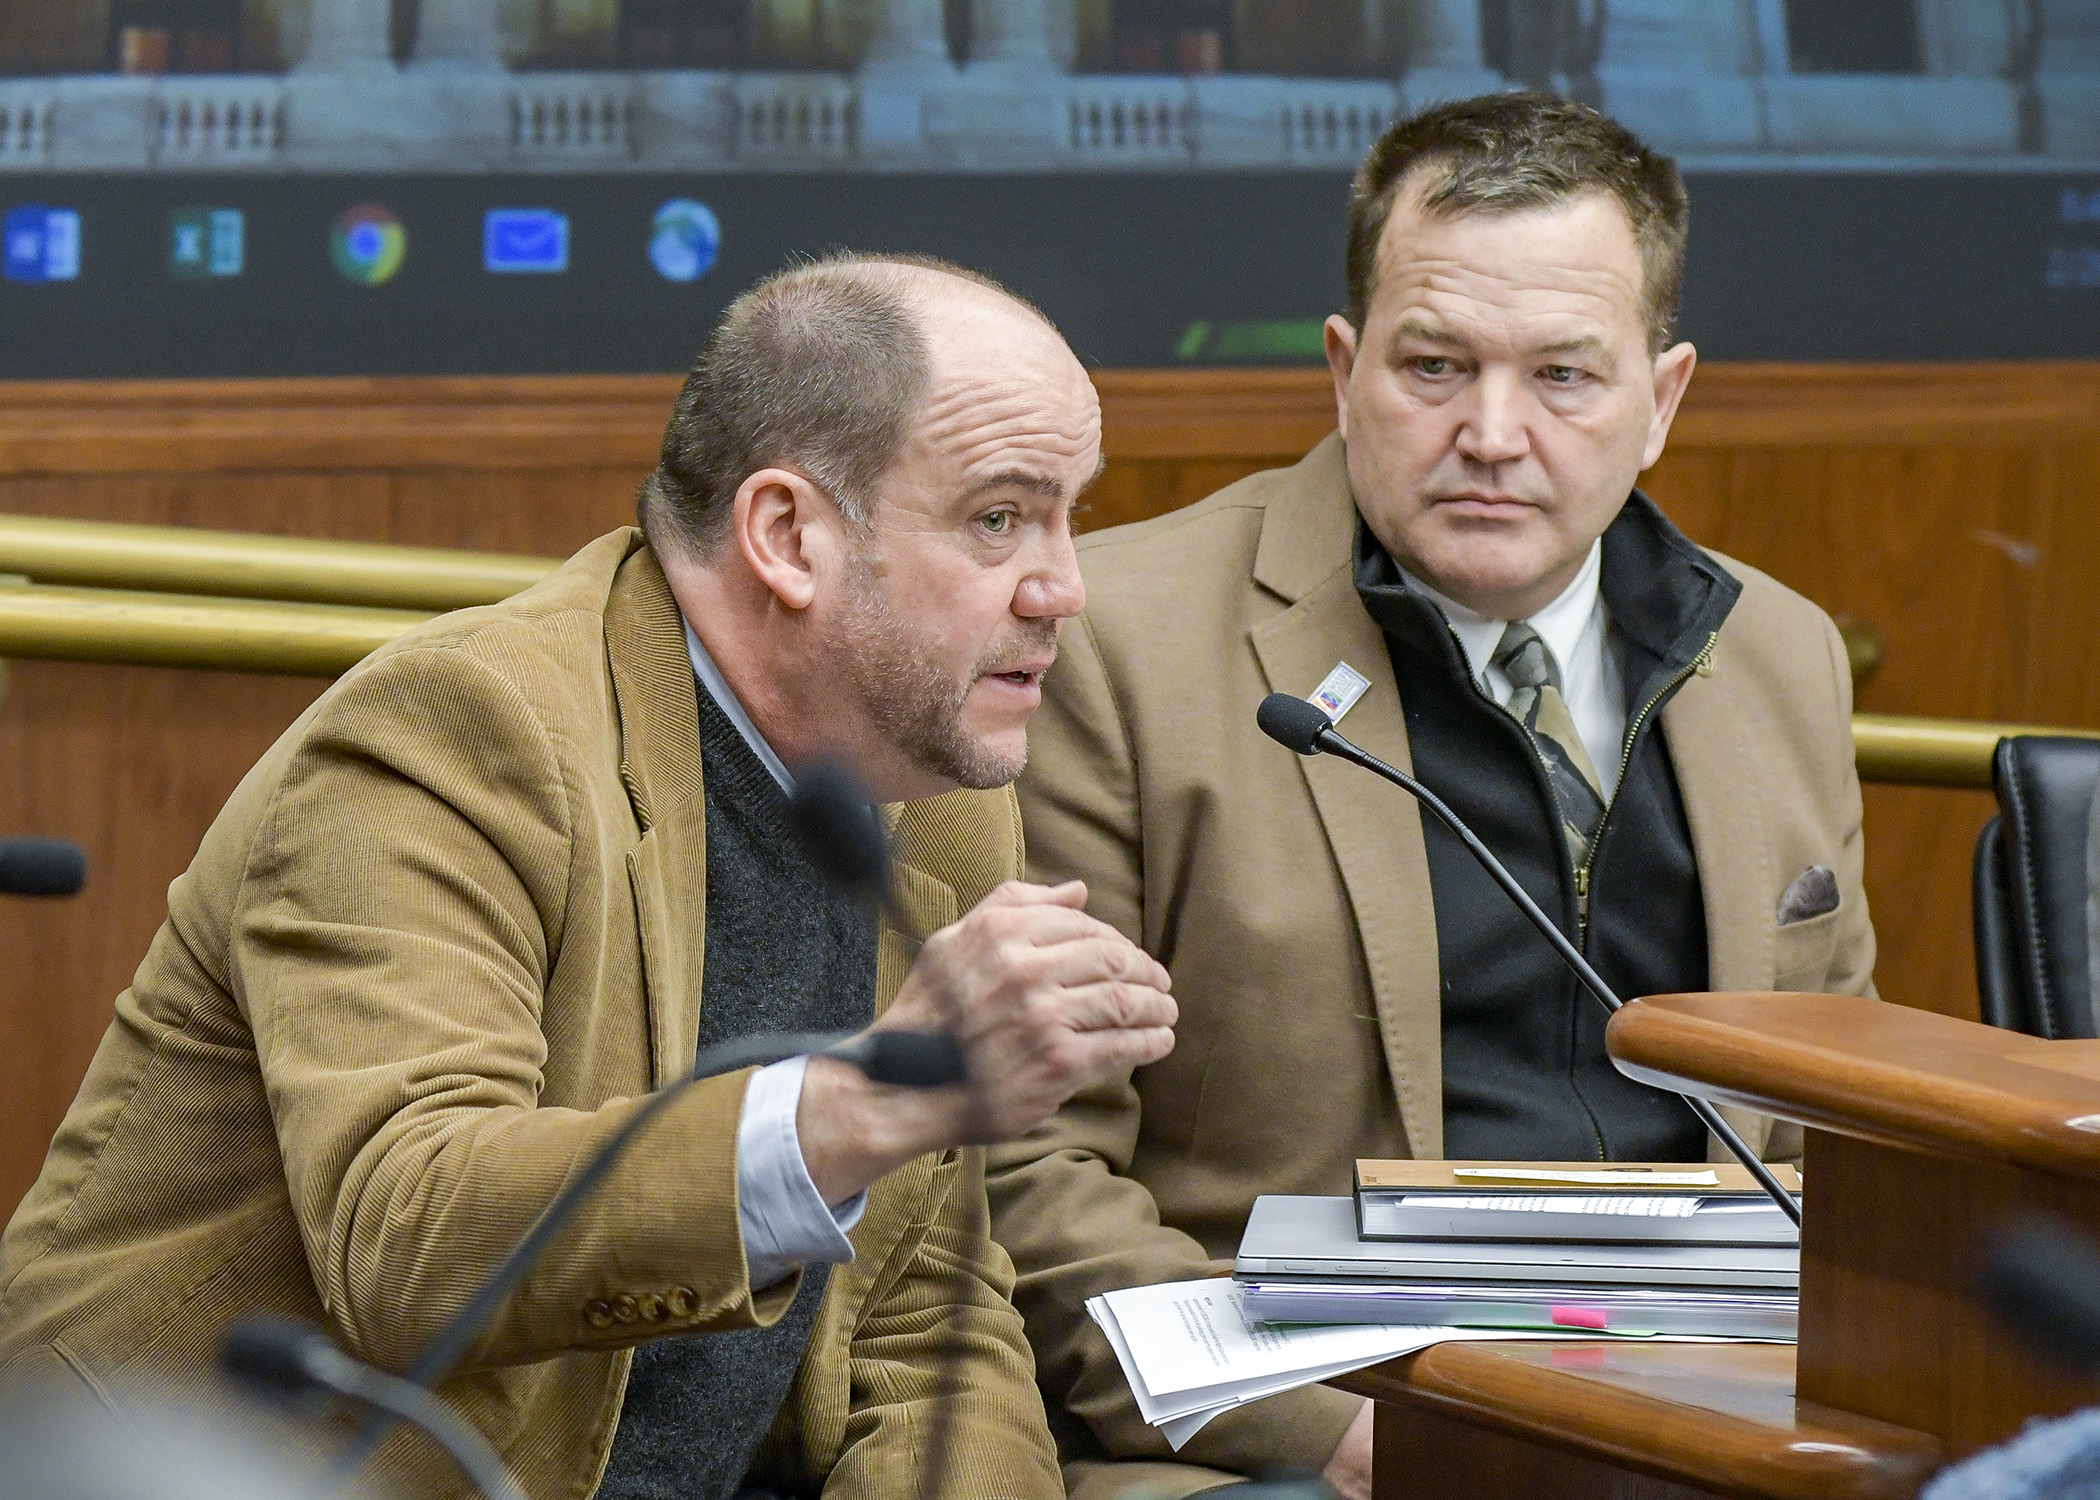 Todd Johnson, executive director of the Minnesota Amateur Sports Commission, testifies before the House State Government Finance Division Feb. 26 in support of a bill to provide Mighty Ducks grant funding. Photo by Andrew VonBank